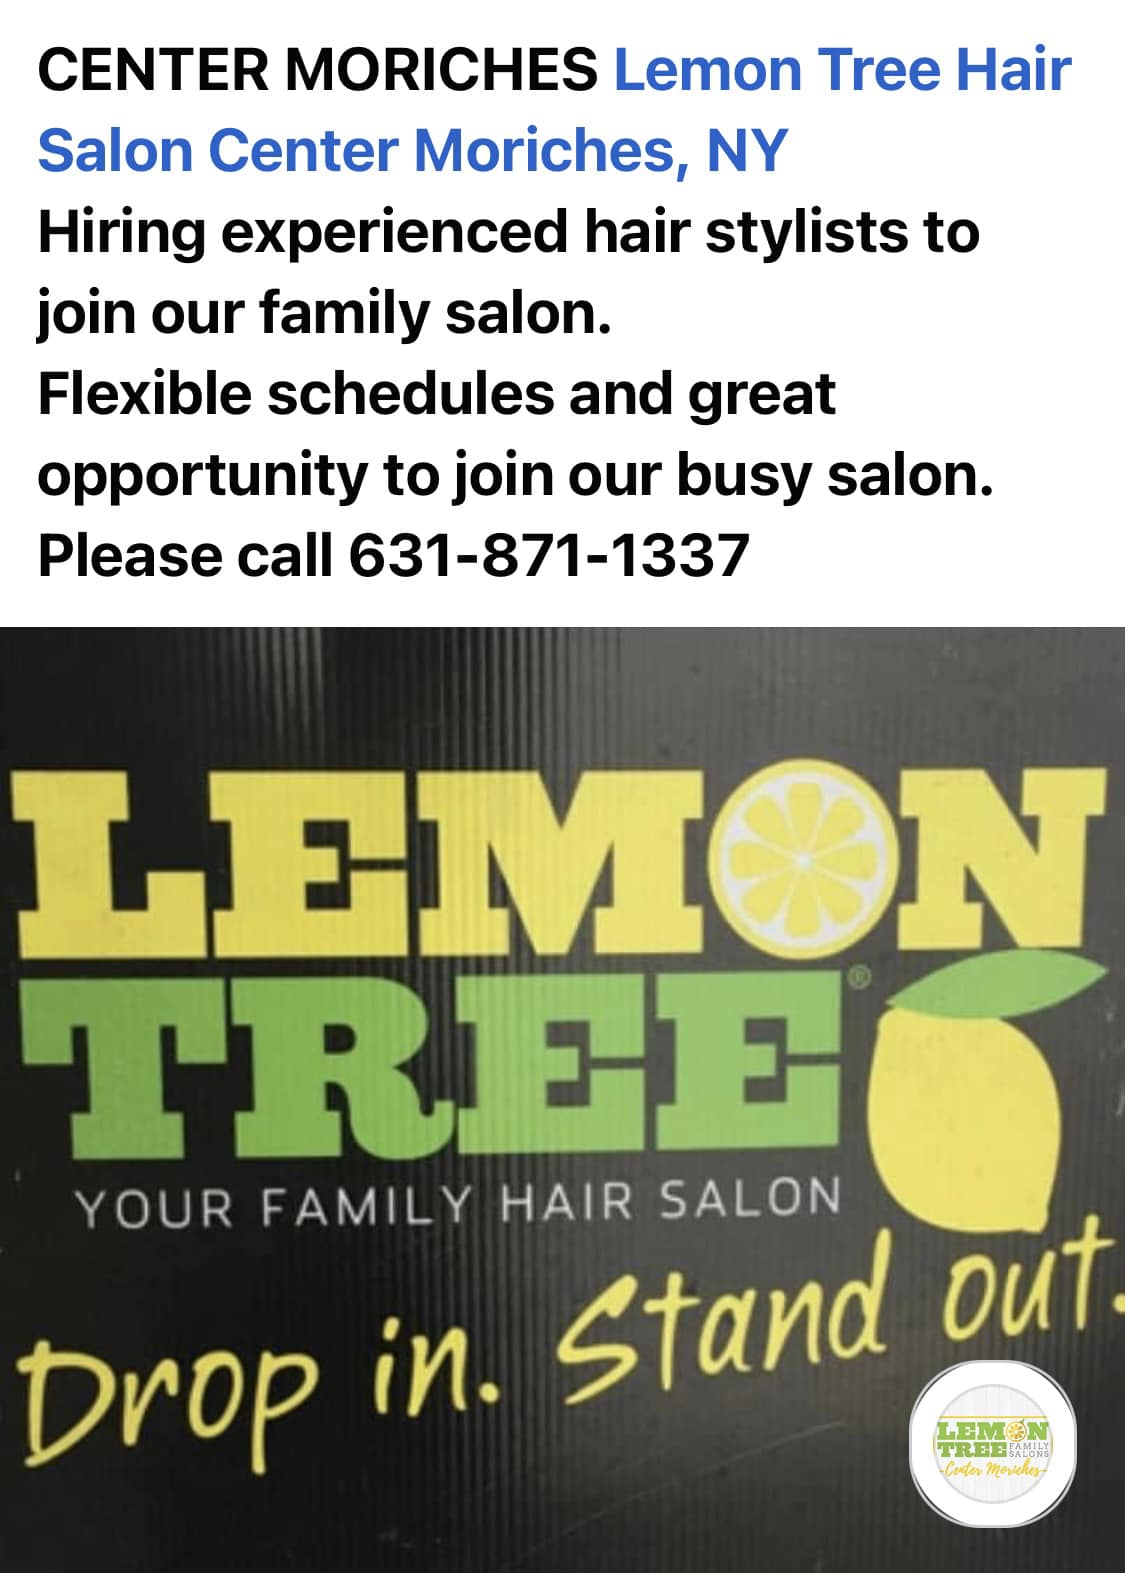 Lemon Tree Hair Salon Middle Island 1275 Middle Country Rd, Middle Island New York 11953